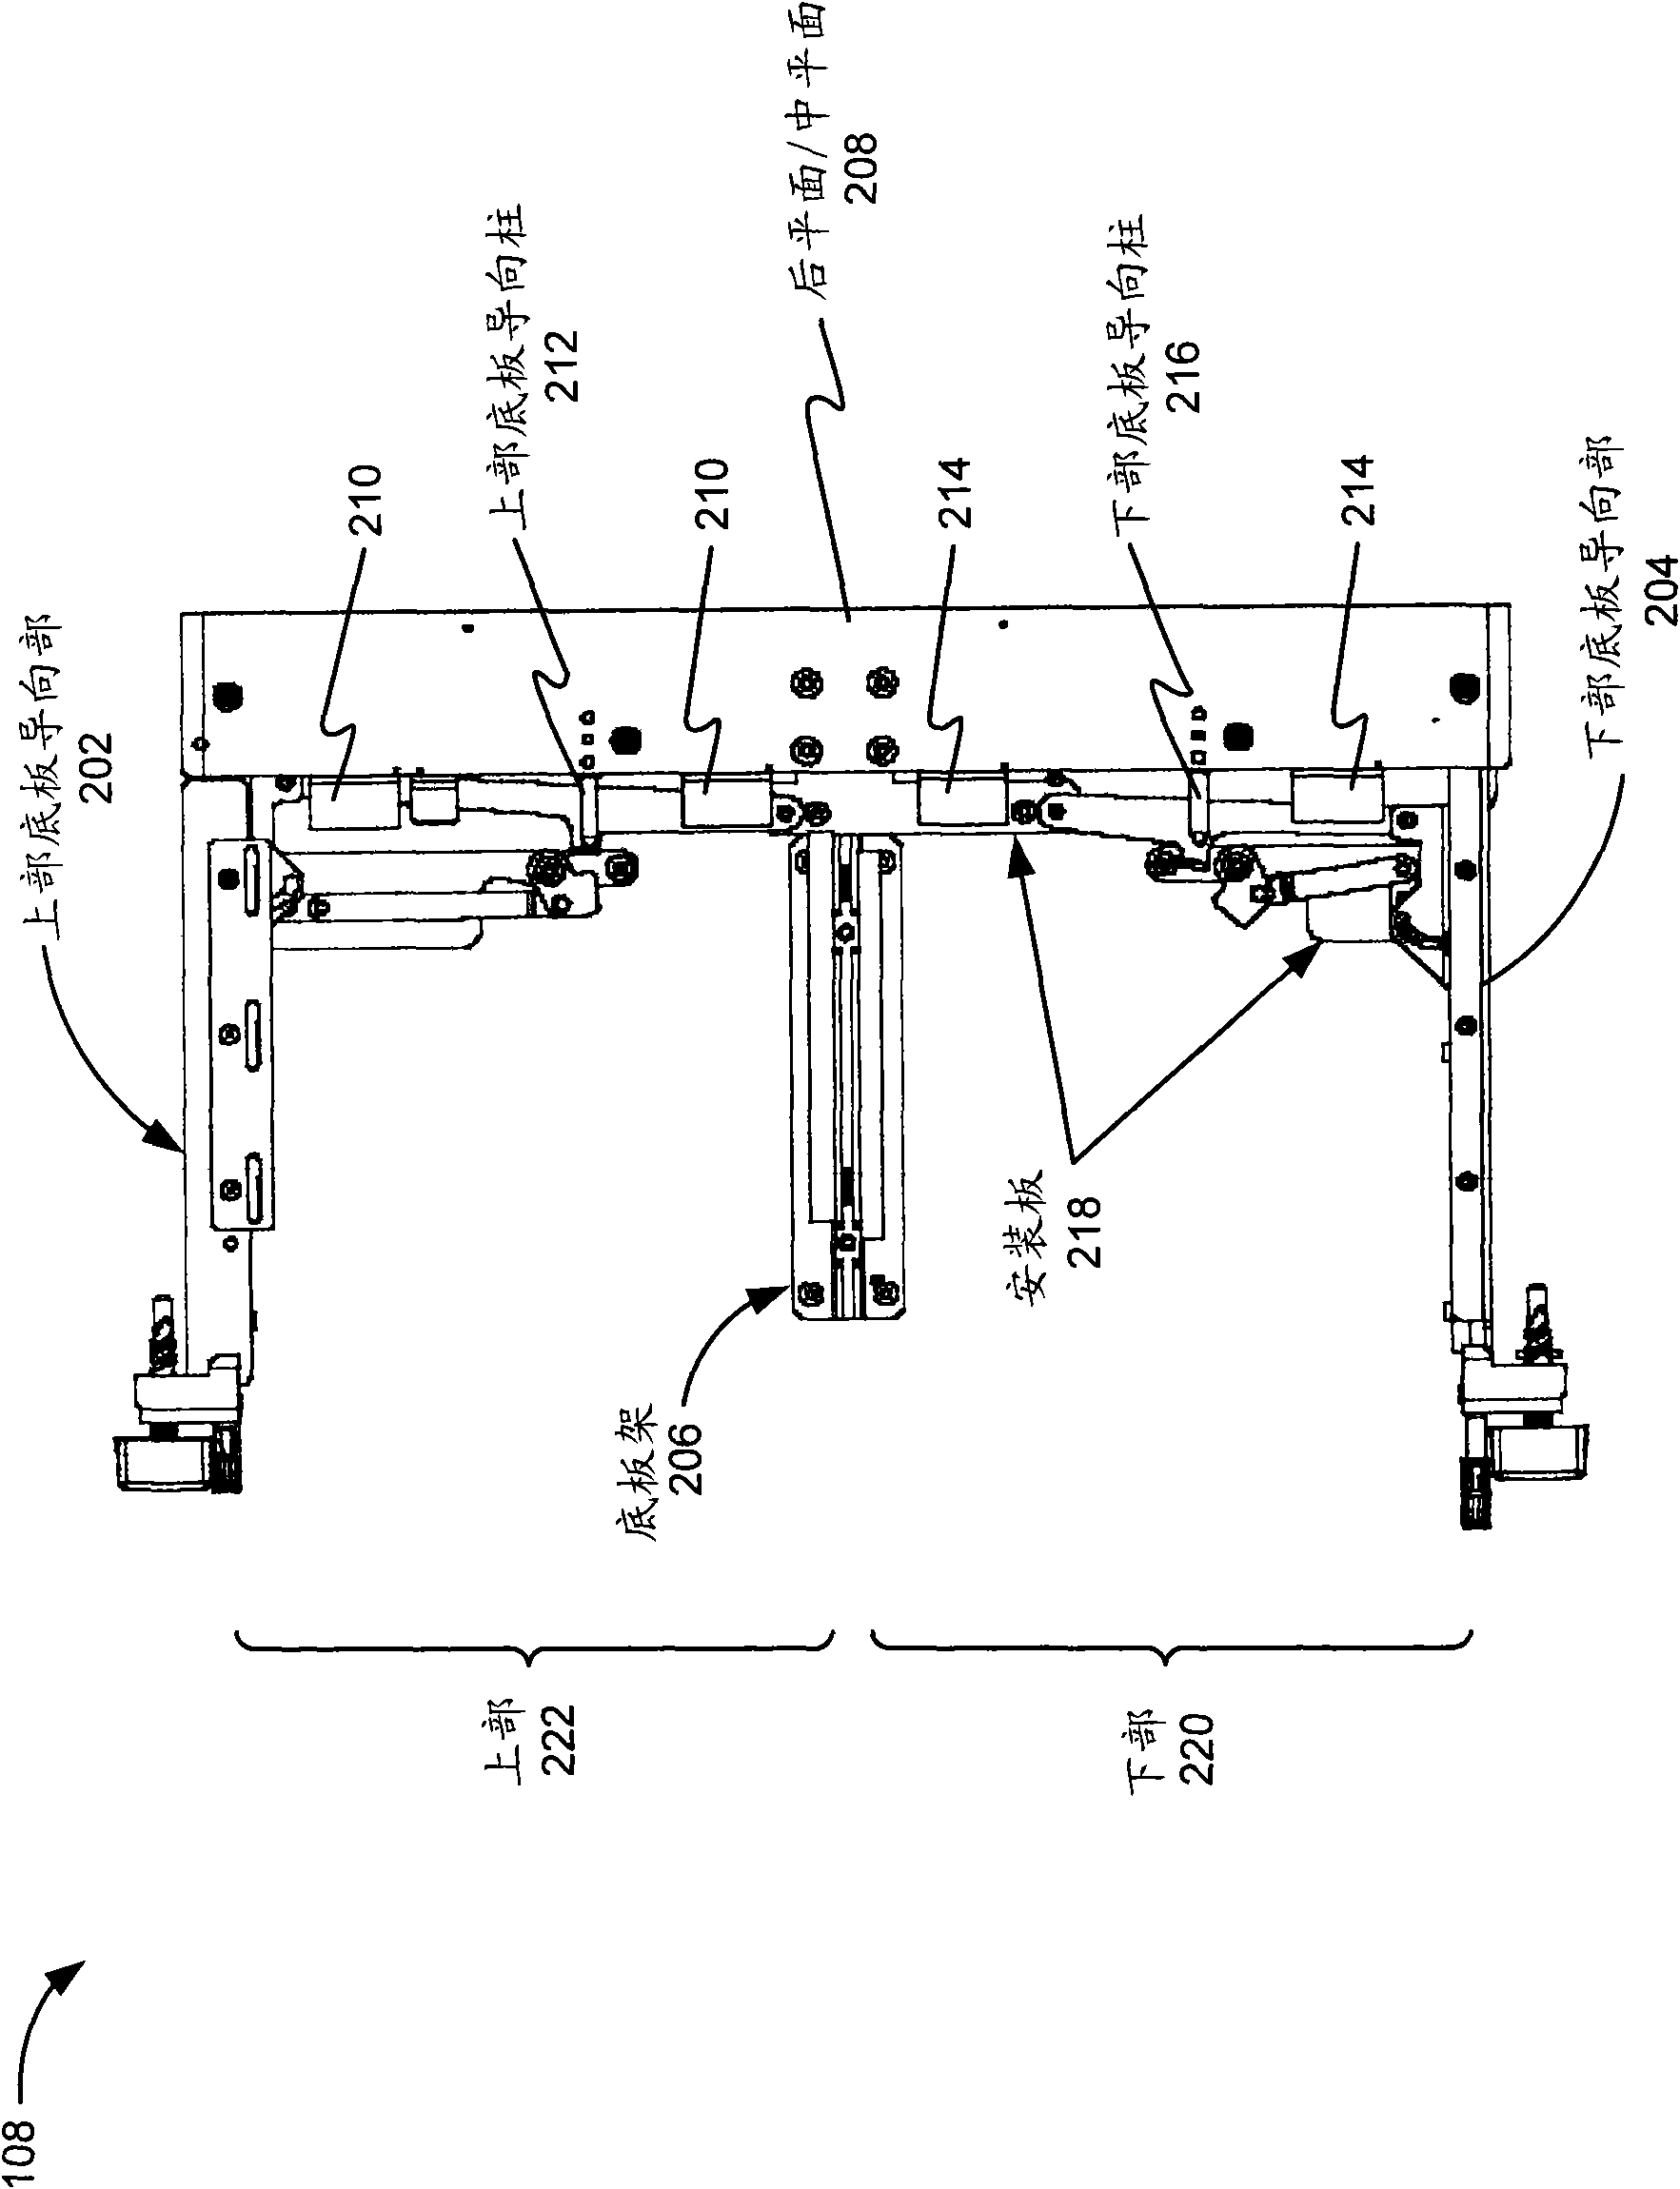 Retention-extraction device for removable cards in a chassis